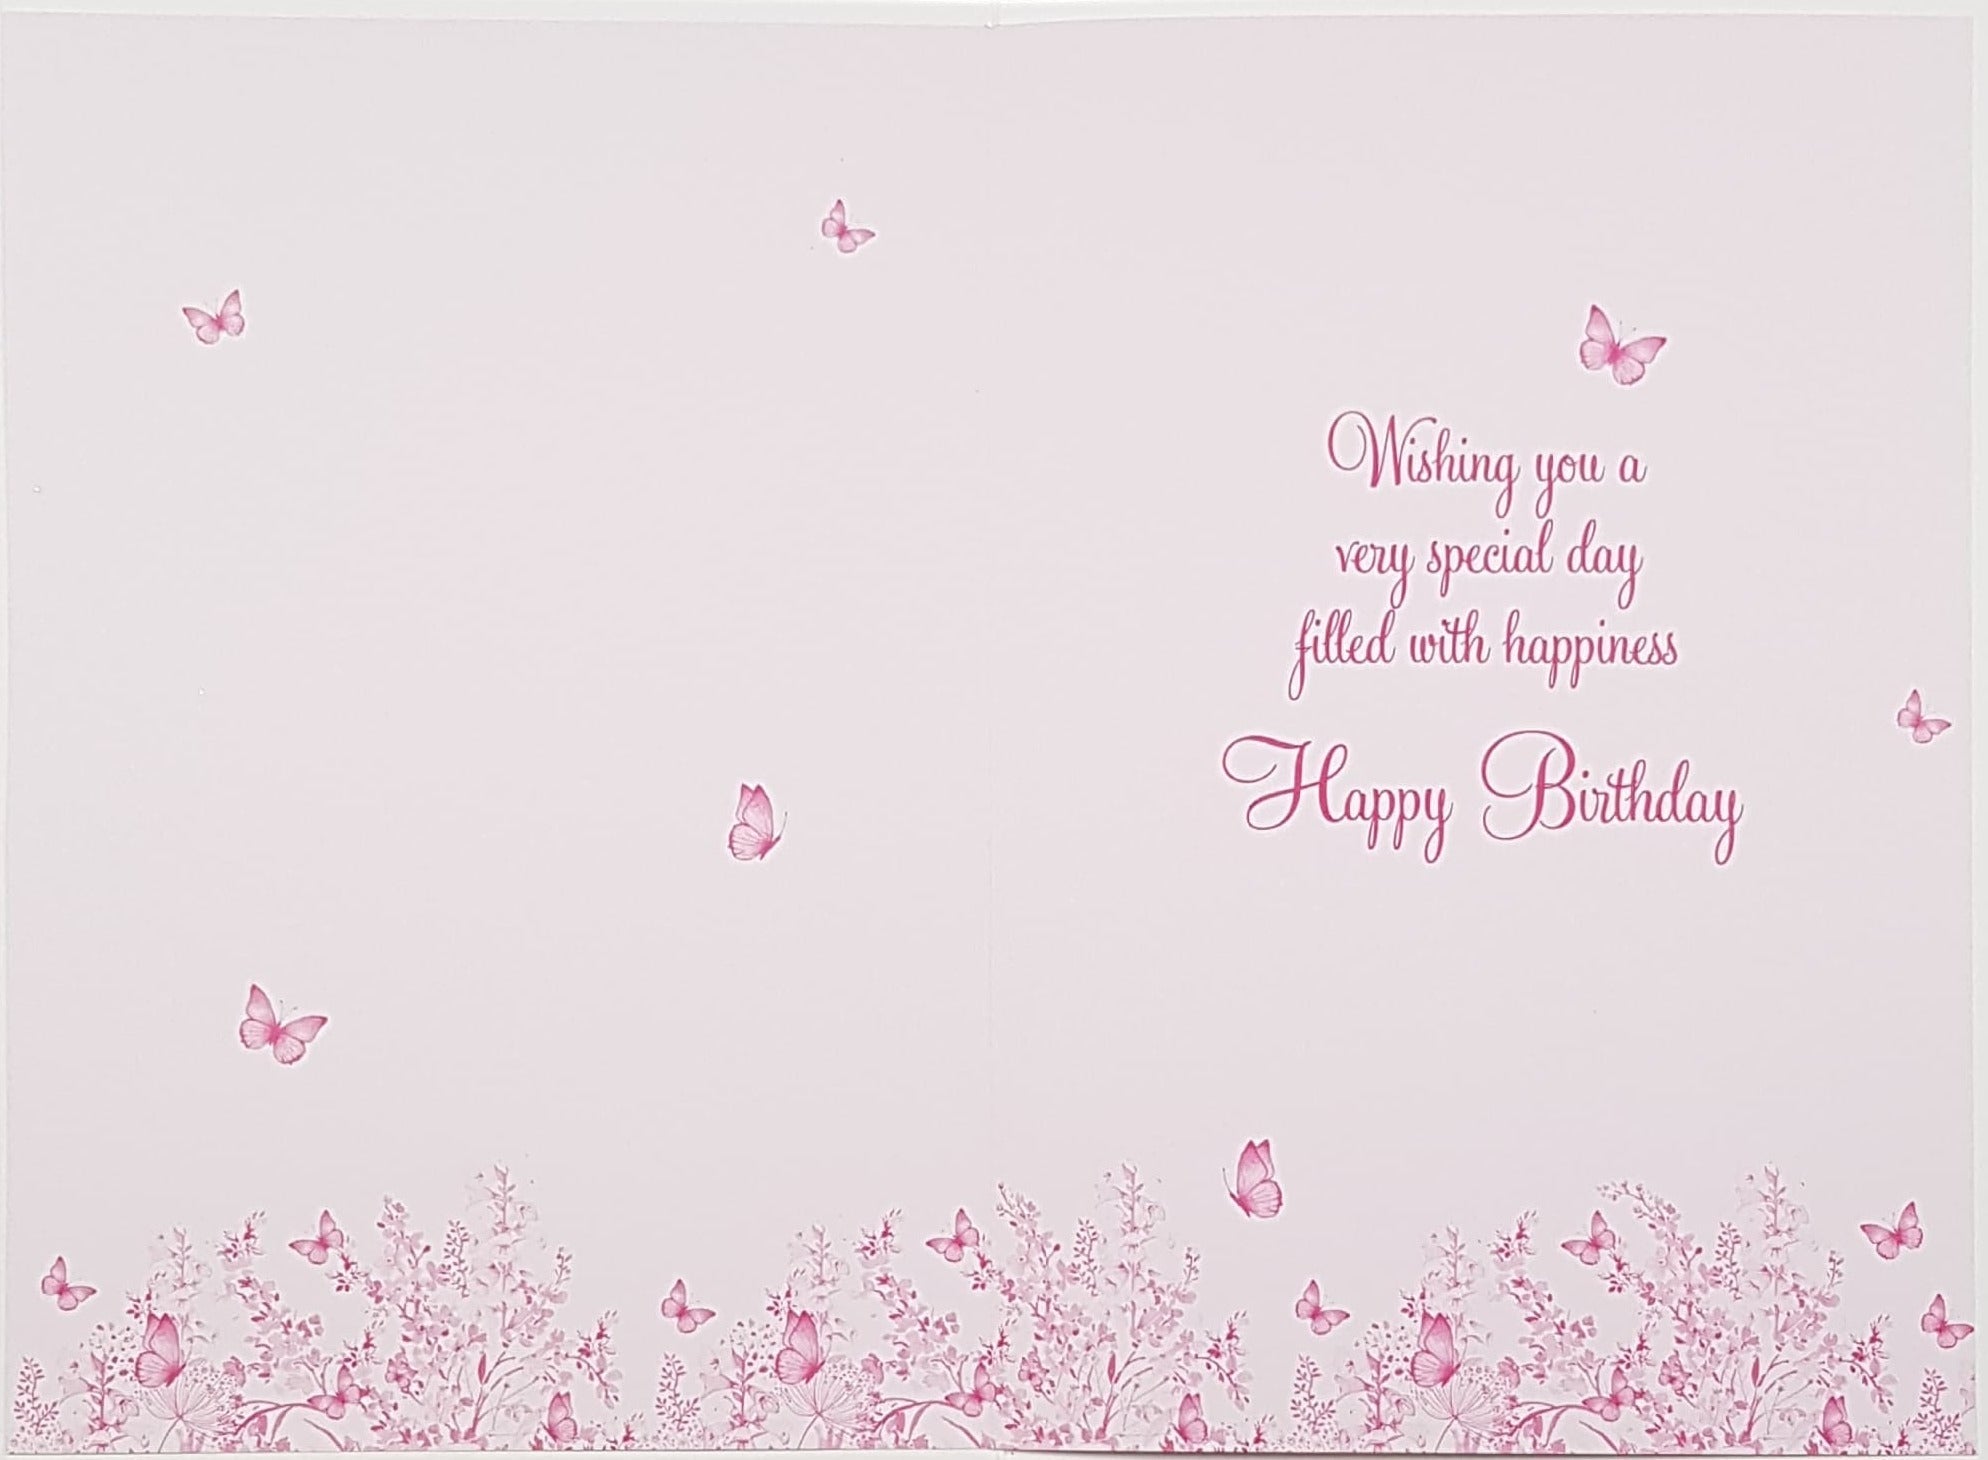 Birthday Card - Auntie/ A Meadow Of Pink Flowers & Butterflies